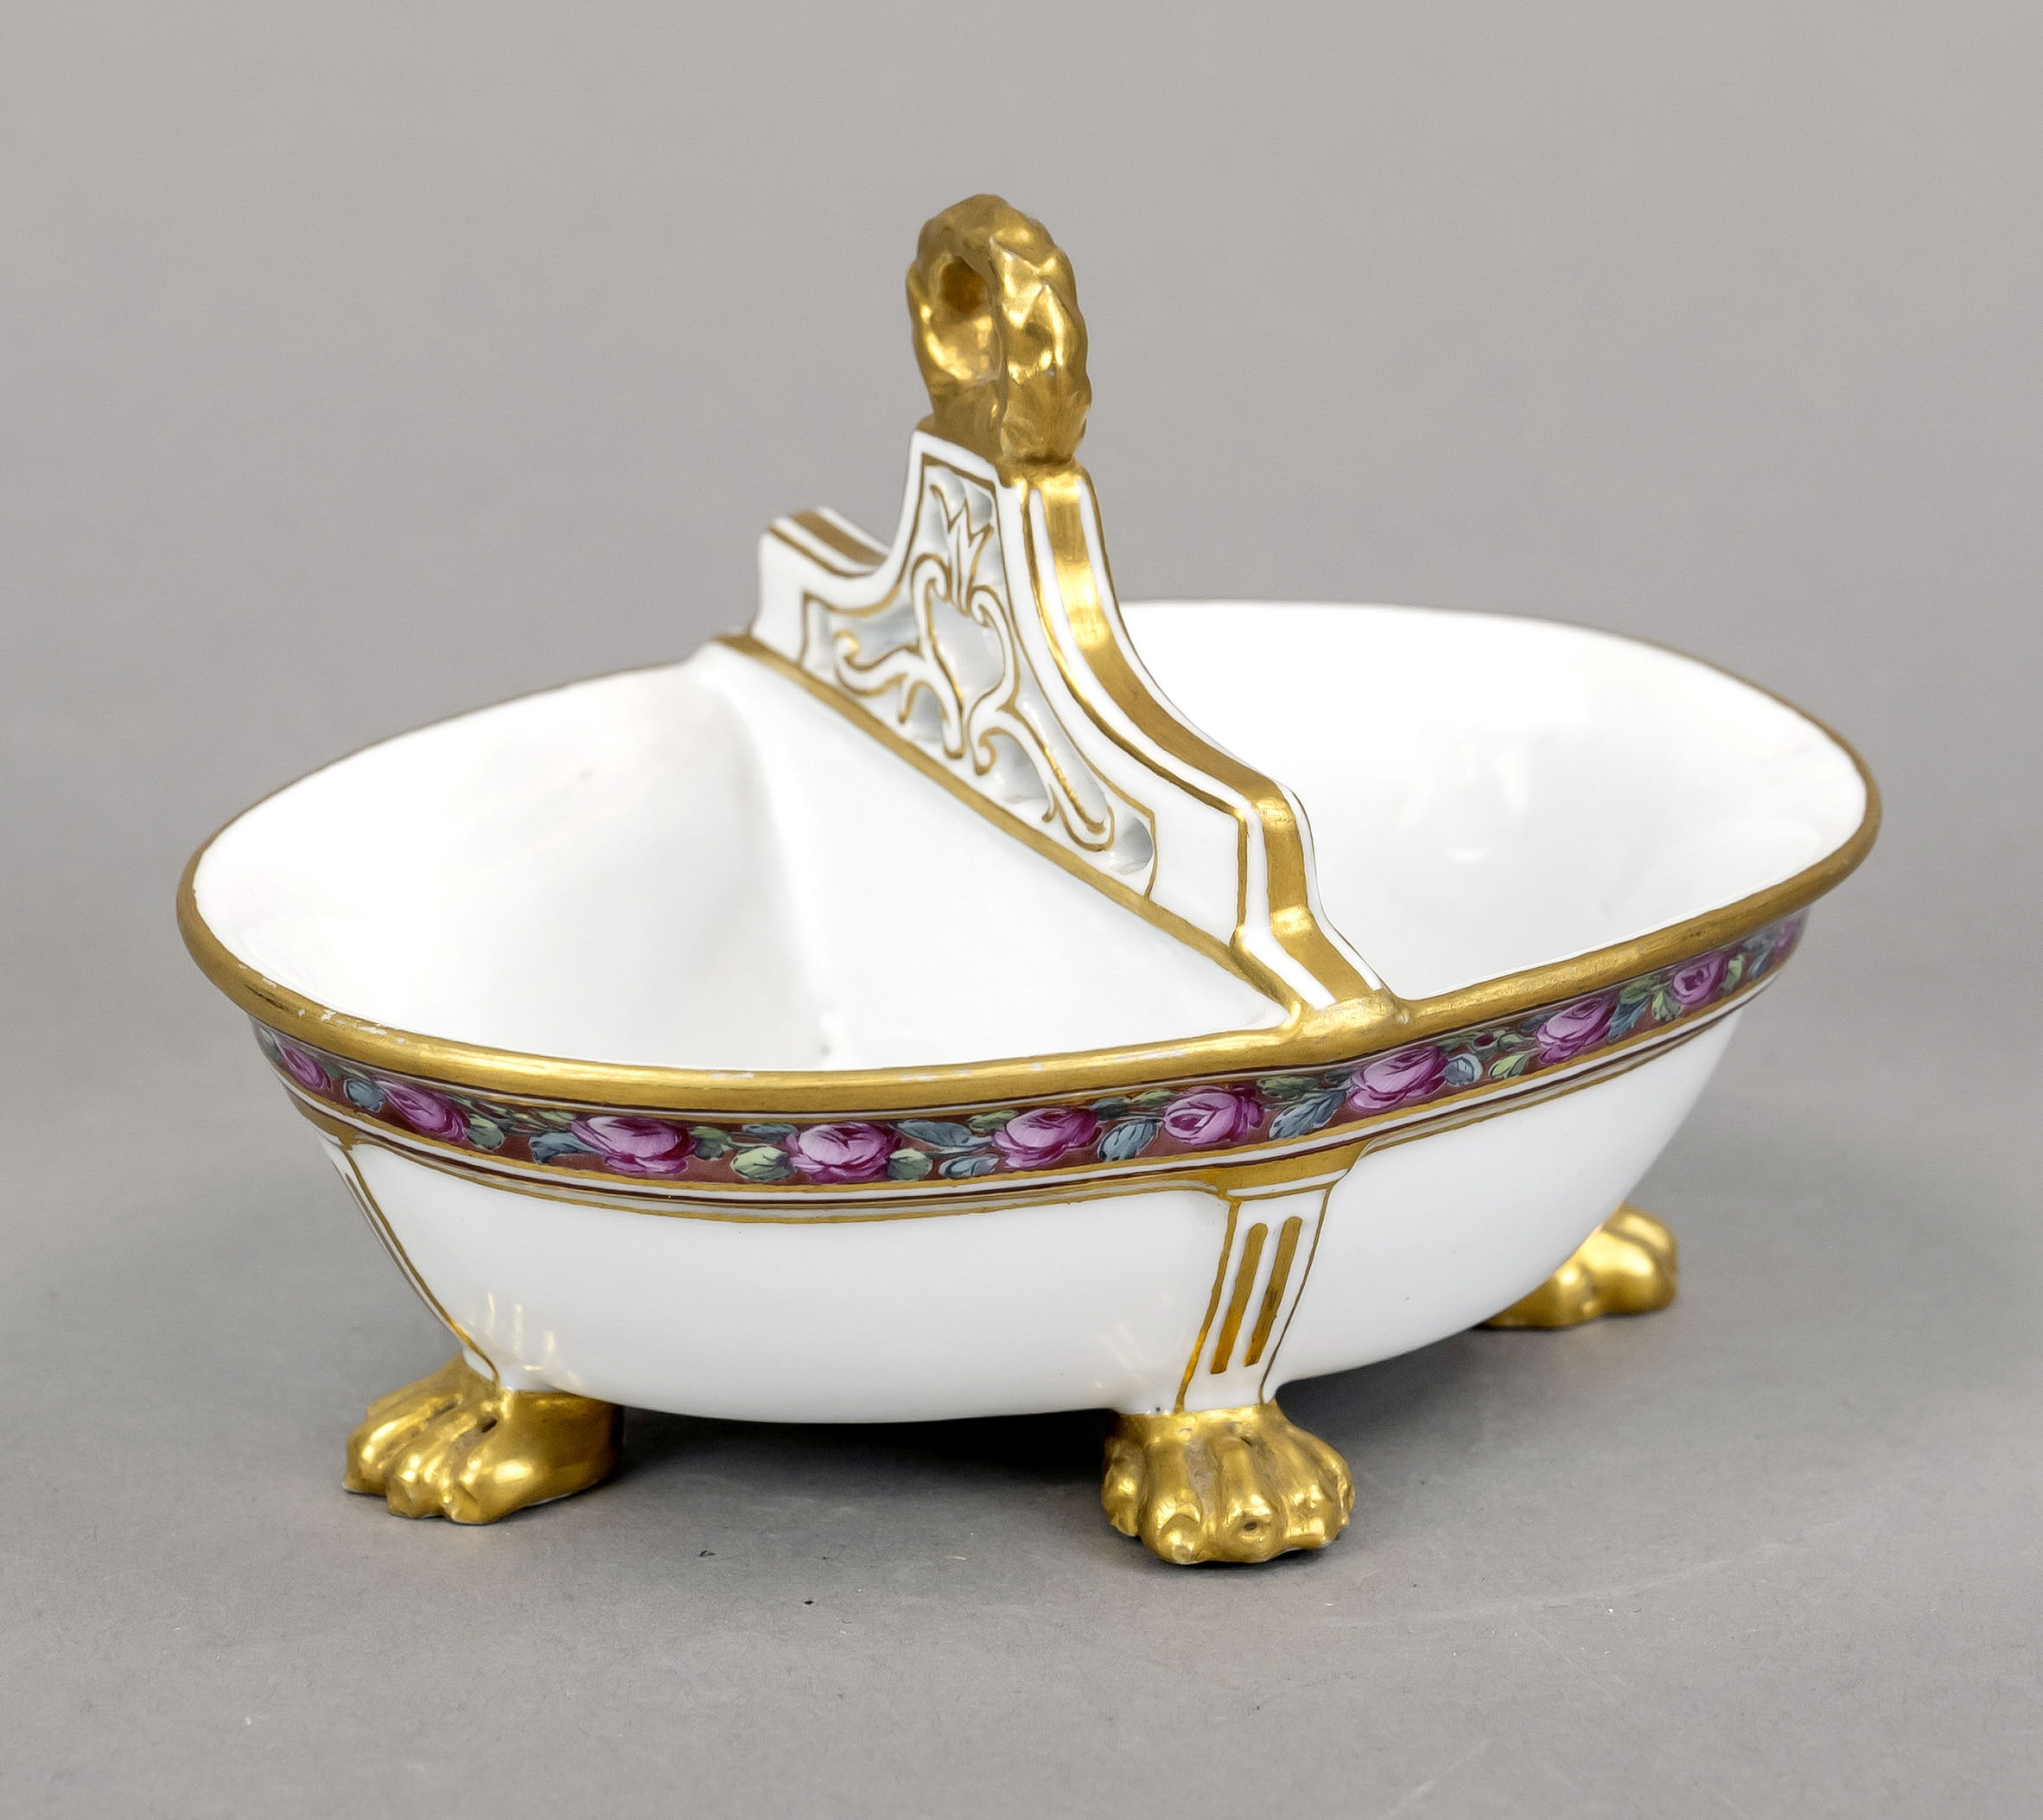 Spice bowl from the wedding service for Grand Duchess Maria Pavlovna, St. Petersburg, imperial